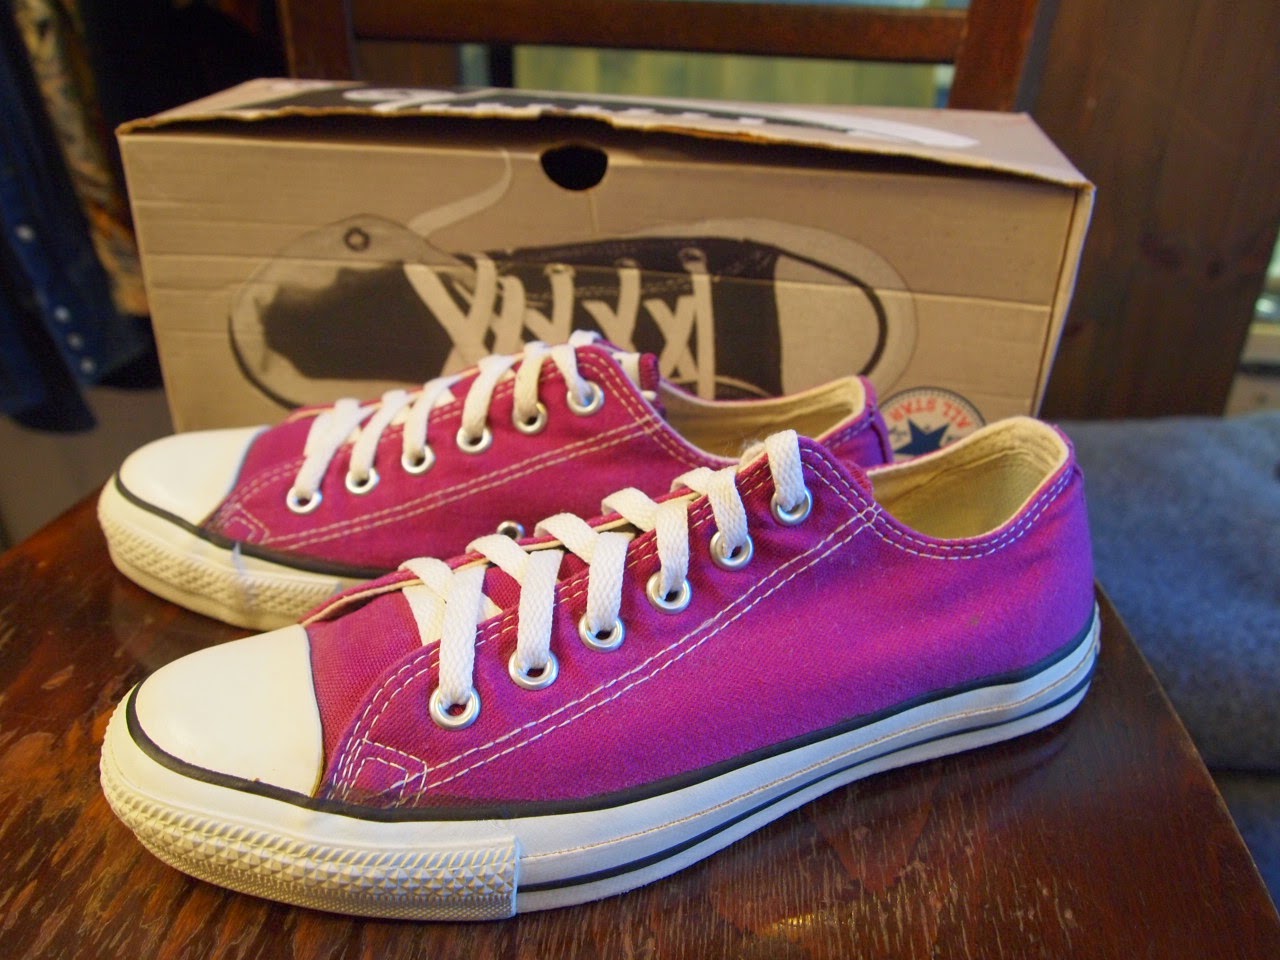 LATHRILLS BLOG - ラスリルズのブログ: converse allstar leather deadstock "made.in